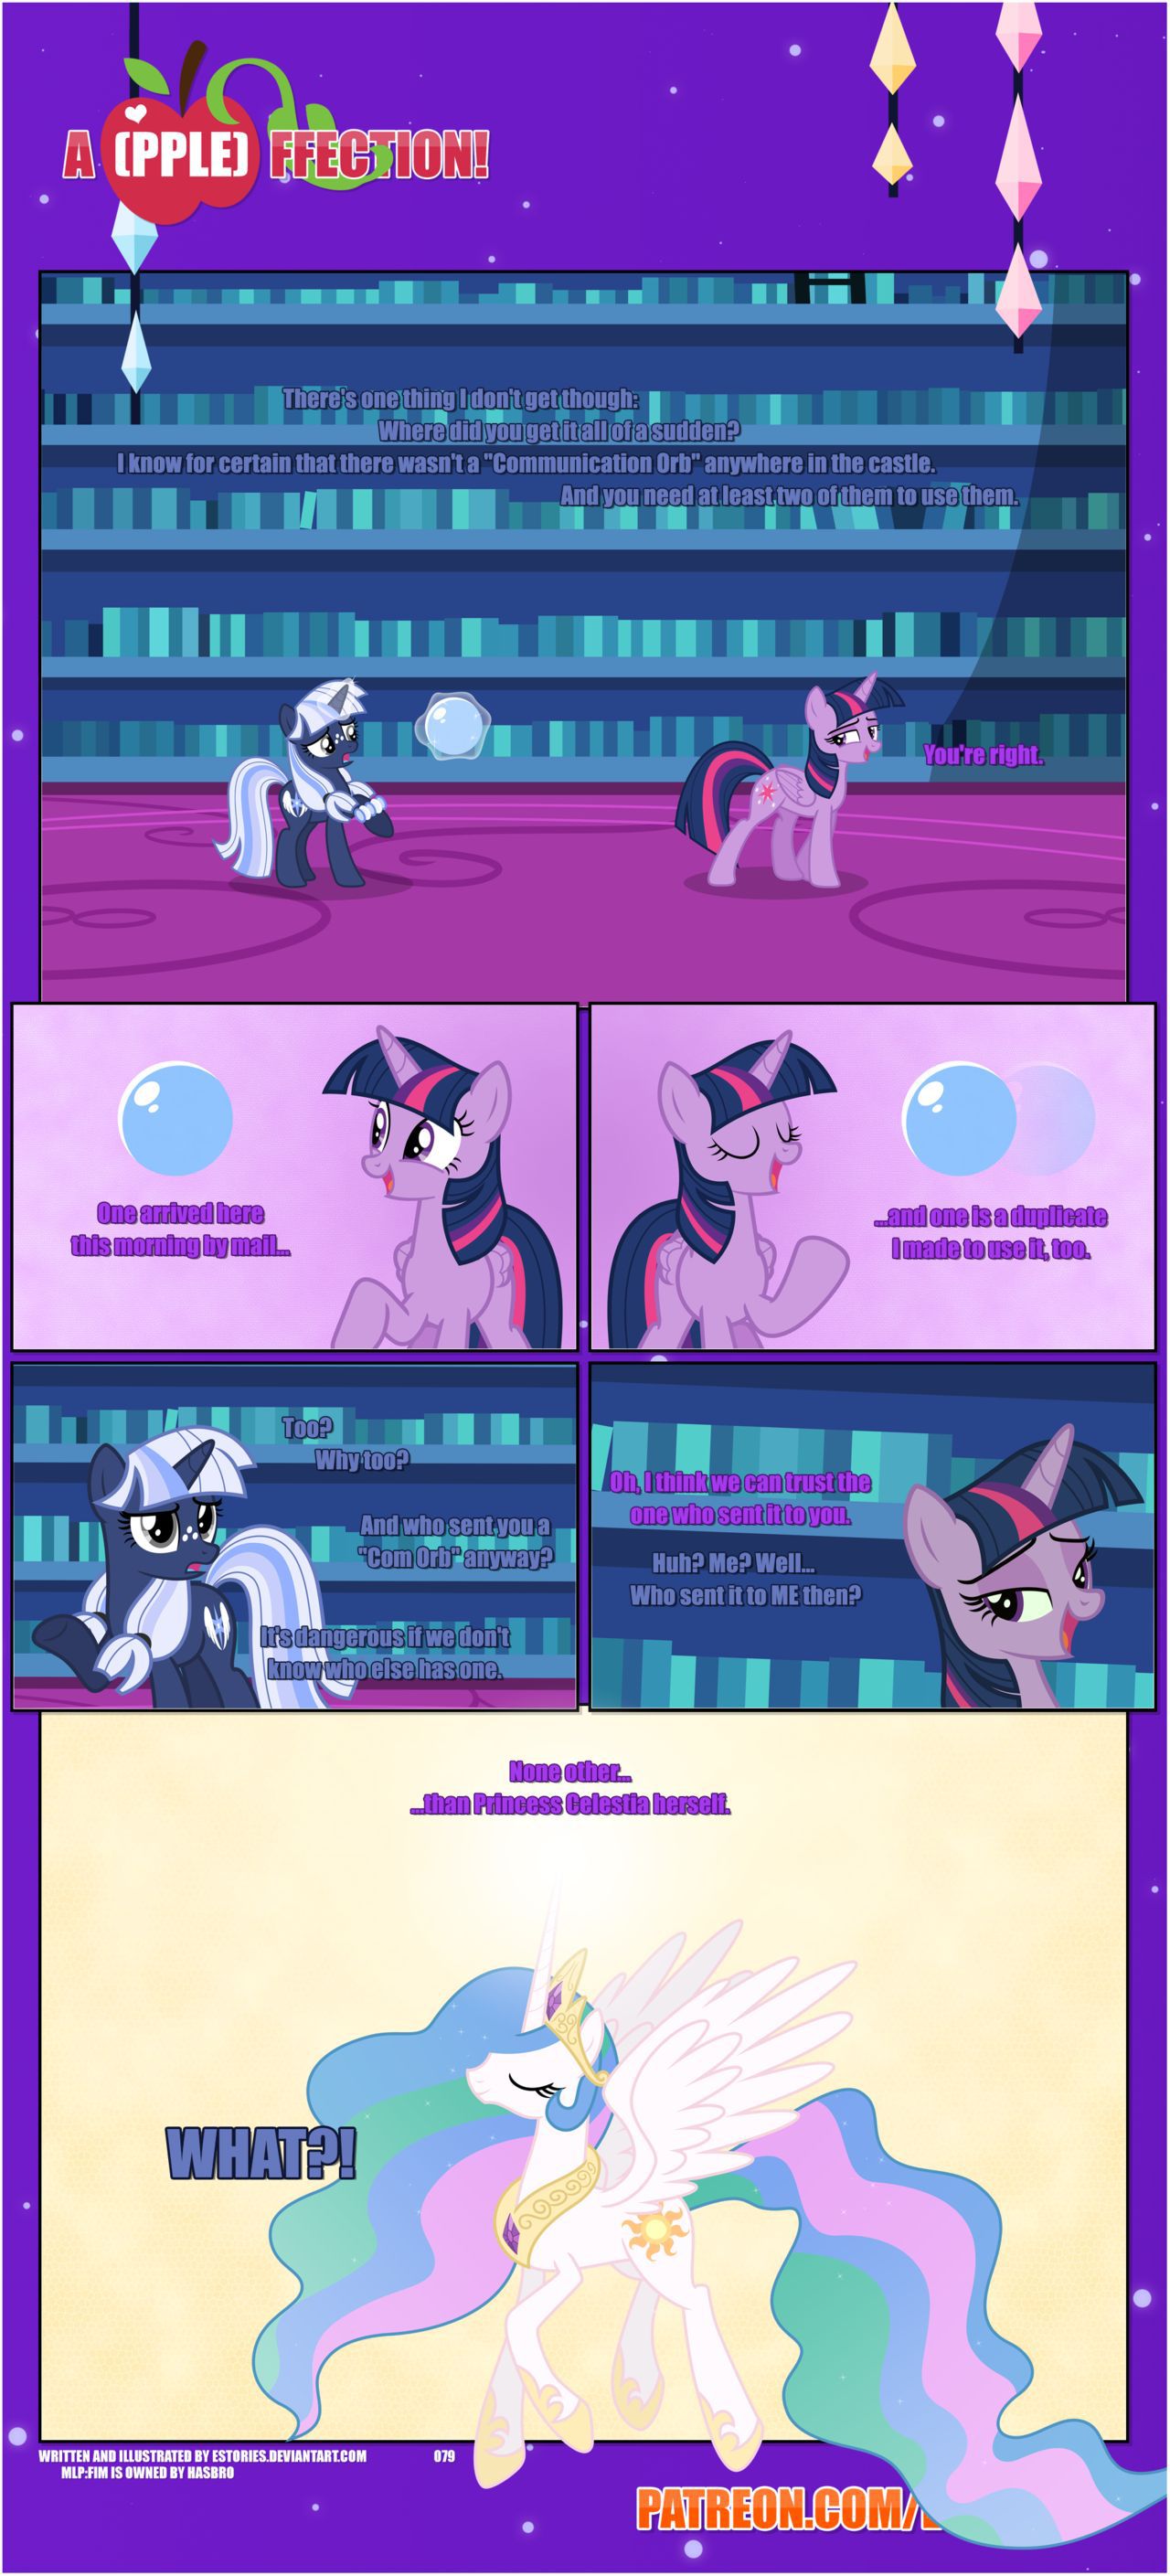 [EStories] Appleffection (My Little Pony Friendship is Magic) [Ongoing] 82